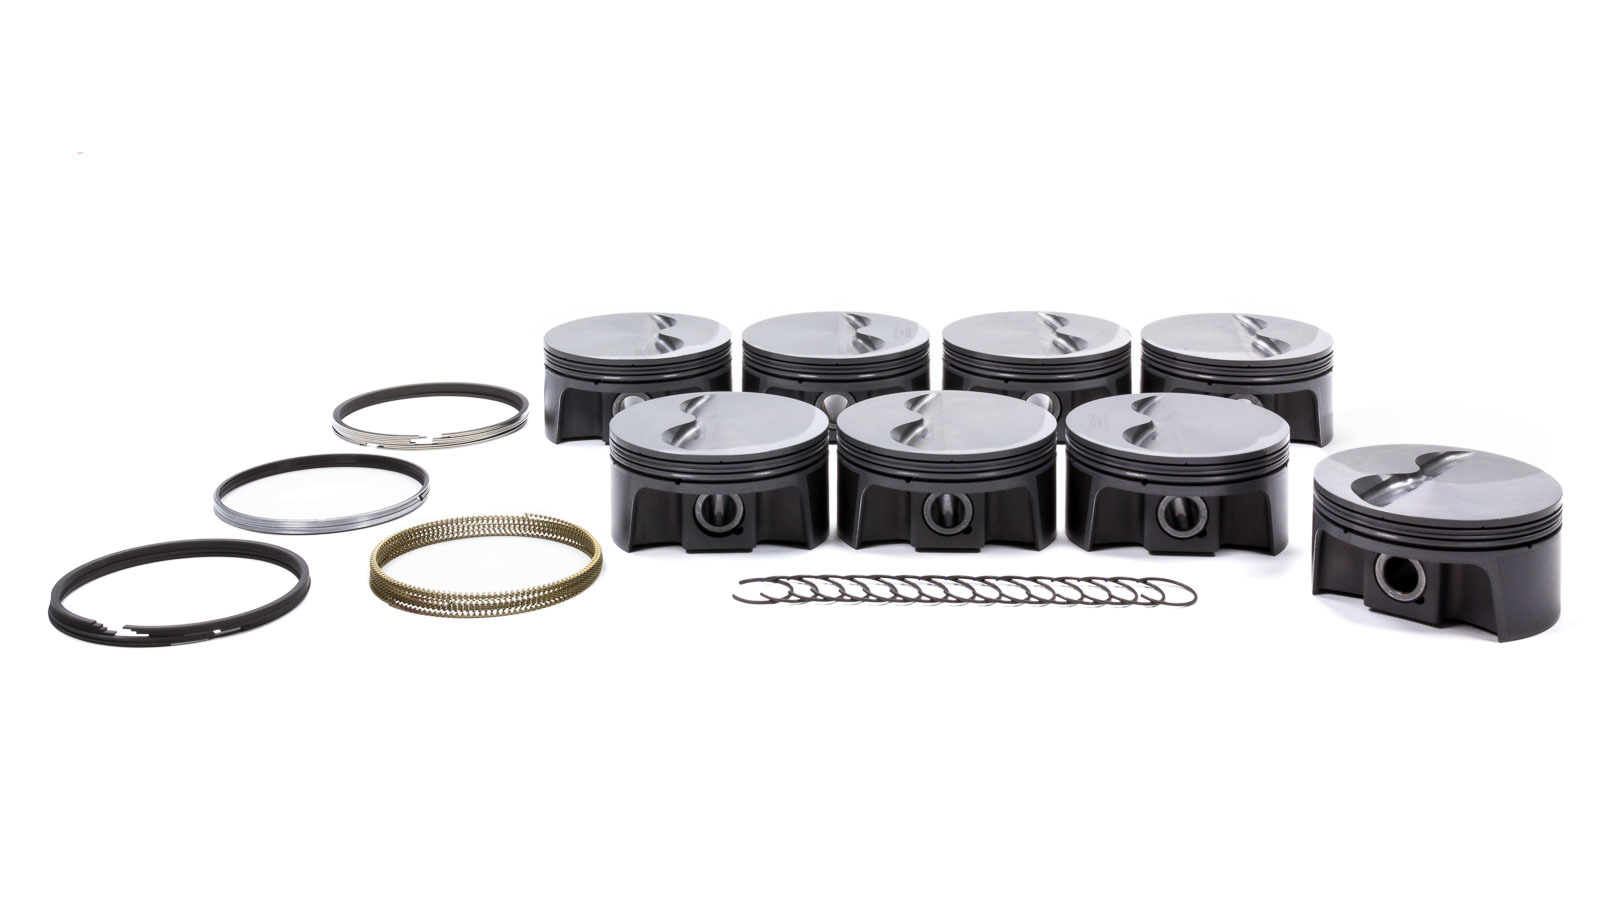 Mahle Pistons 930202640 Piston and Ring, PowerPak, Forged, 4.040 in Bore, 1.0 x 1.0 x 2.0 mm Ring Groove, Minus 4.00 cc, Small Block Chevy, Kit